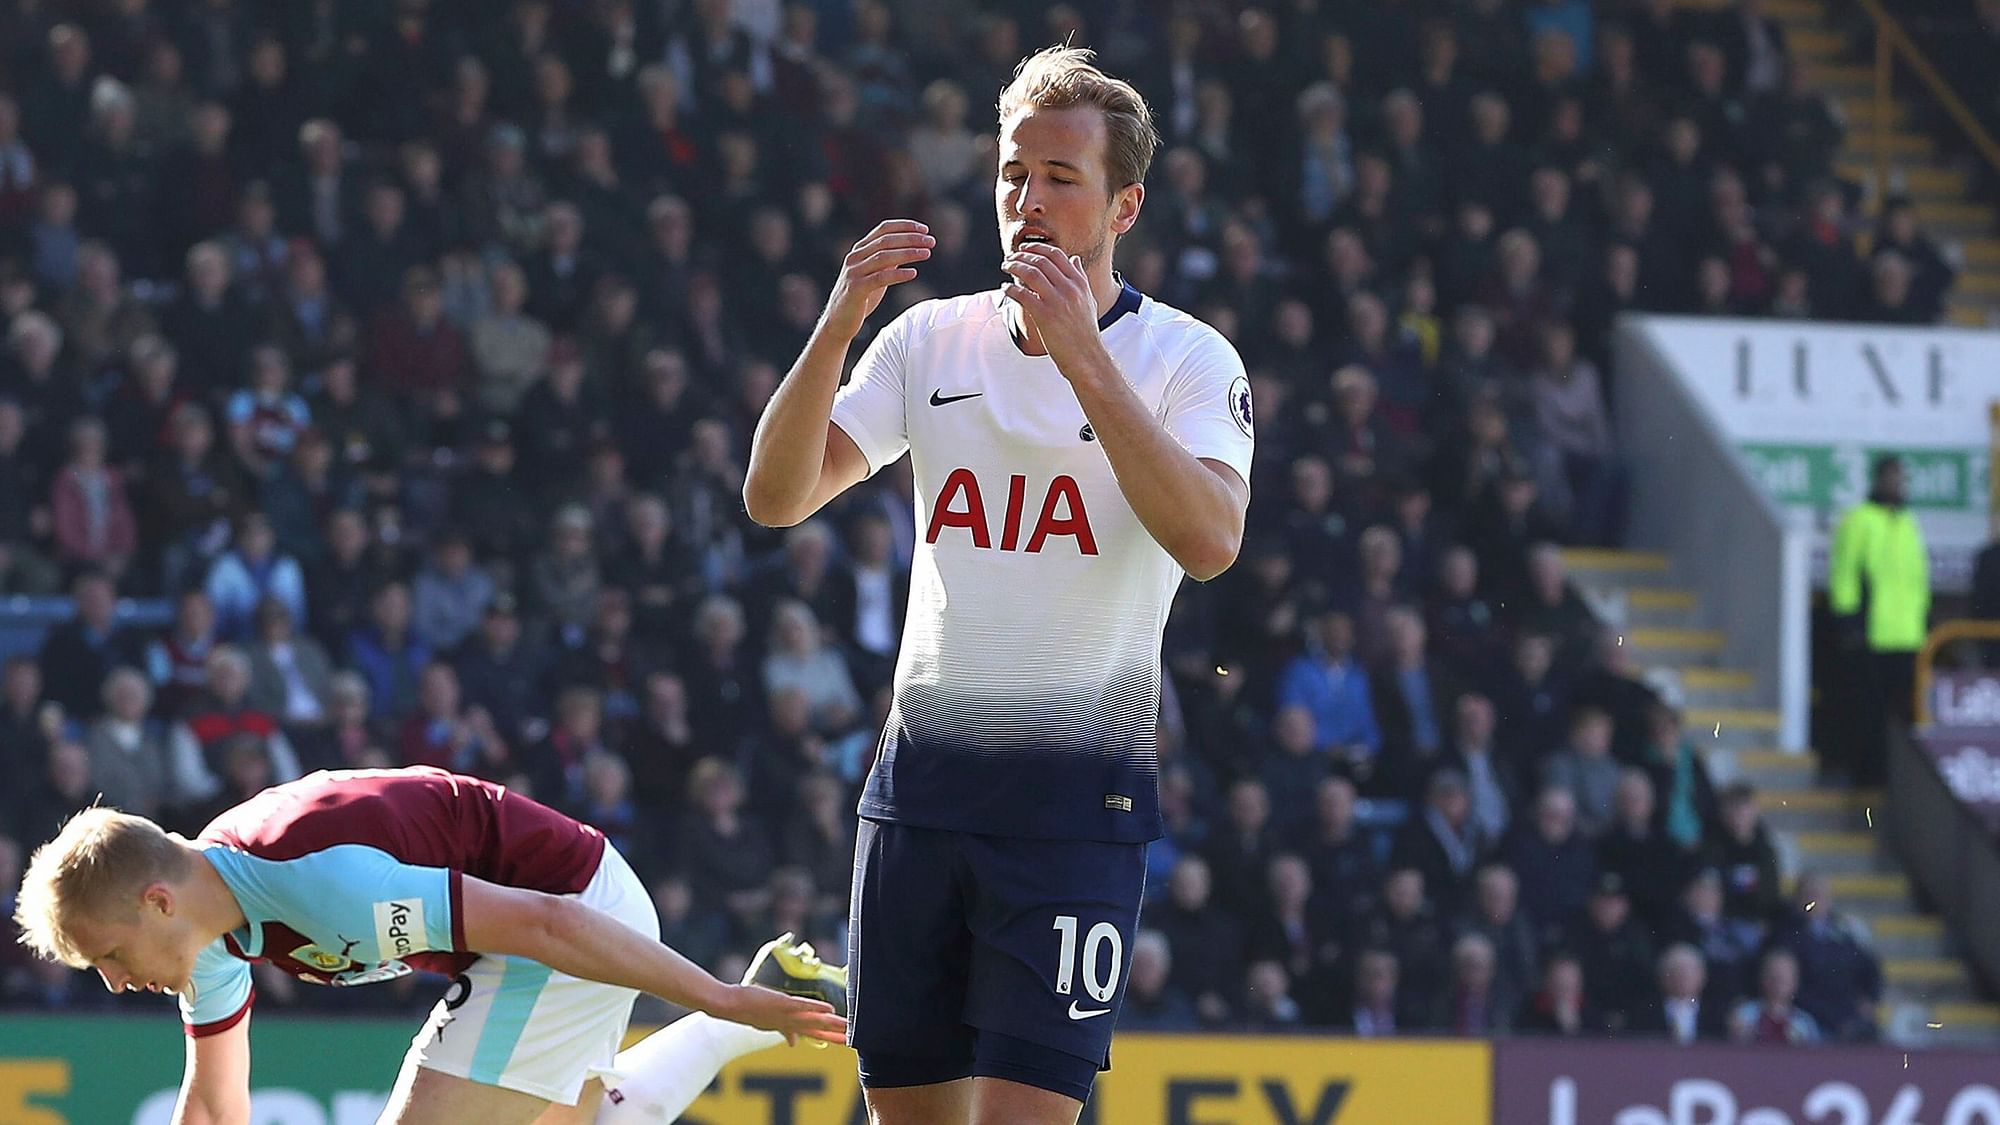 Despite Harry Kane making a scoring return from injury, Tottenham’s slim title chances faded further with a 2-1 loss at Burnley.